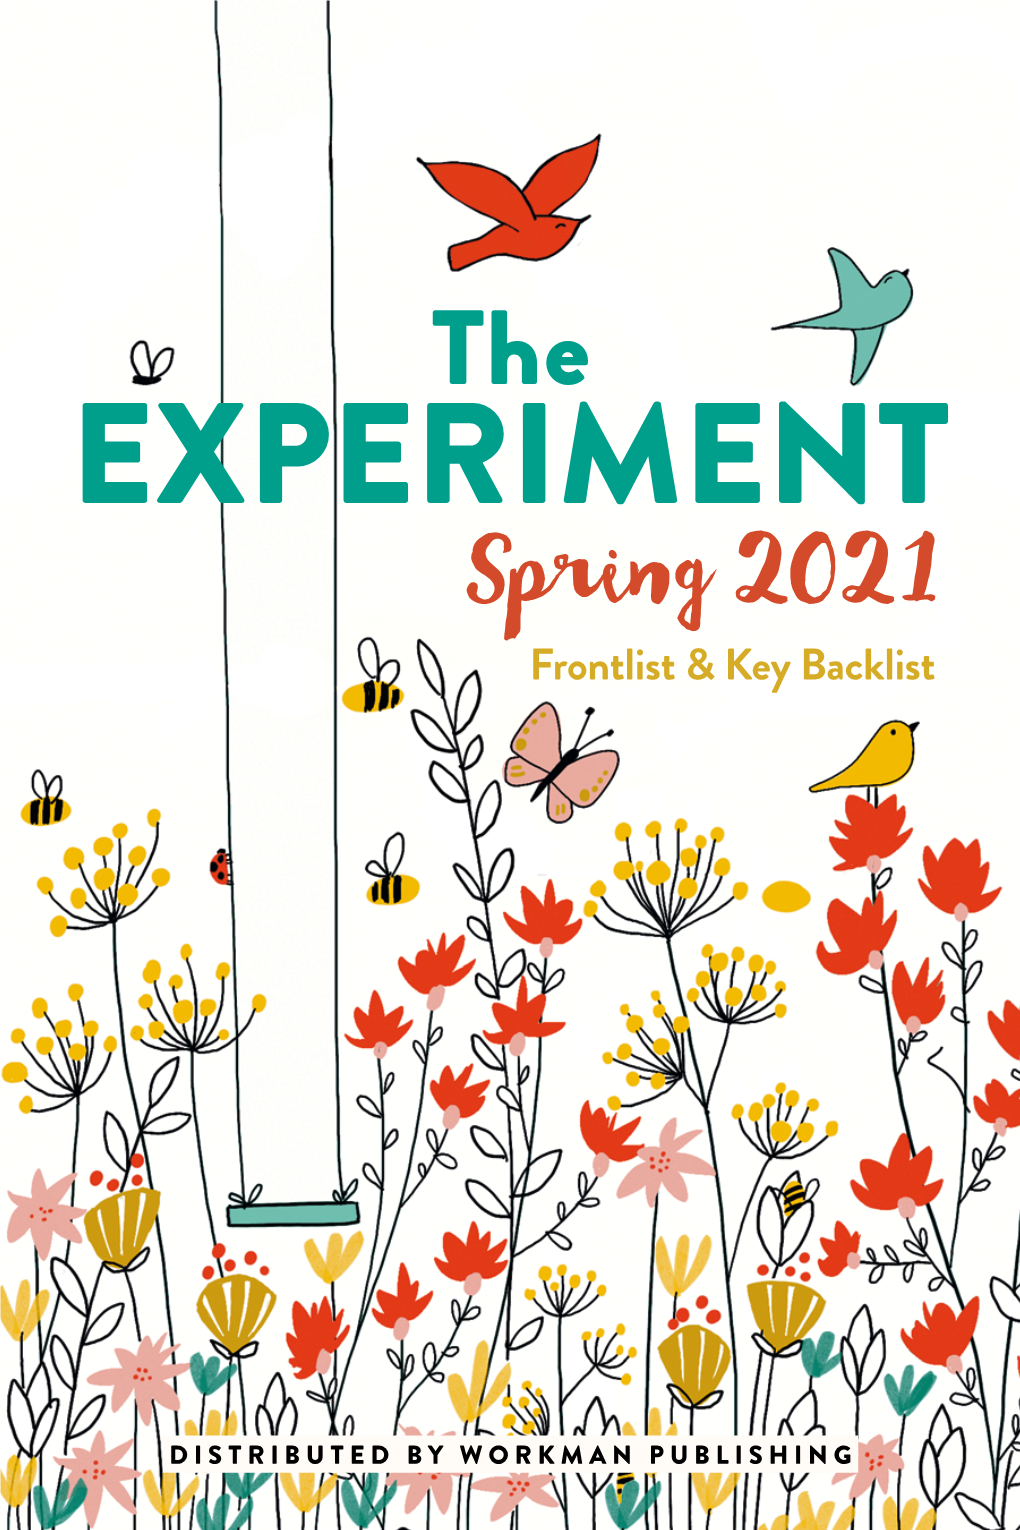 The Experiment's Spring 2021 Catalog